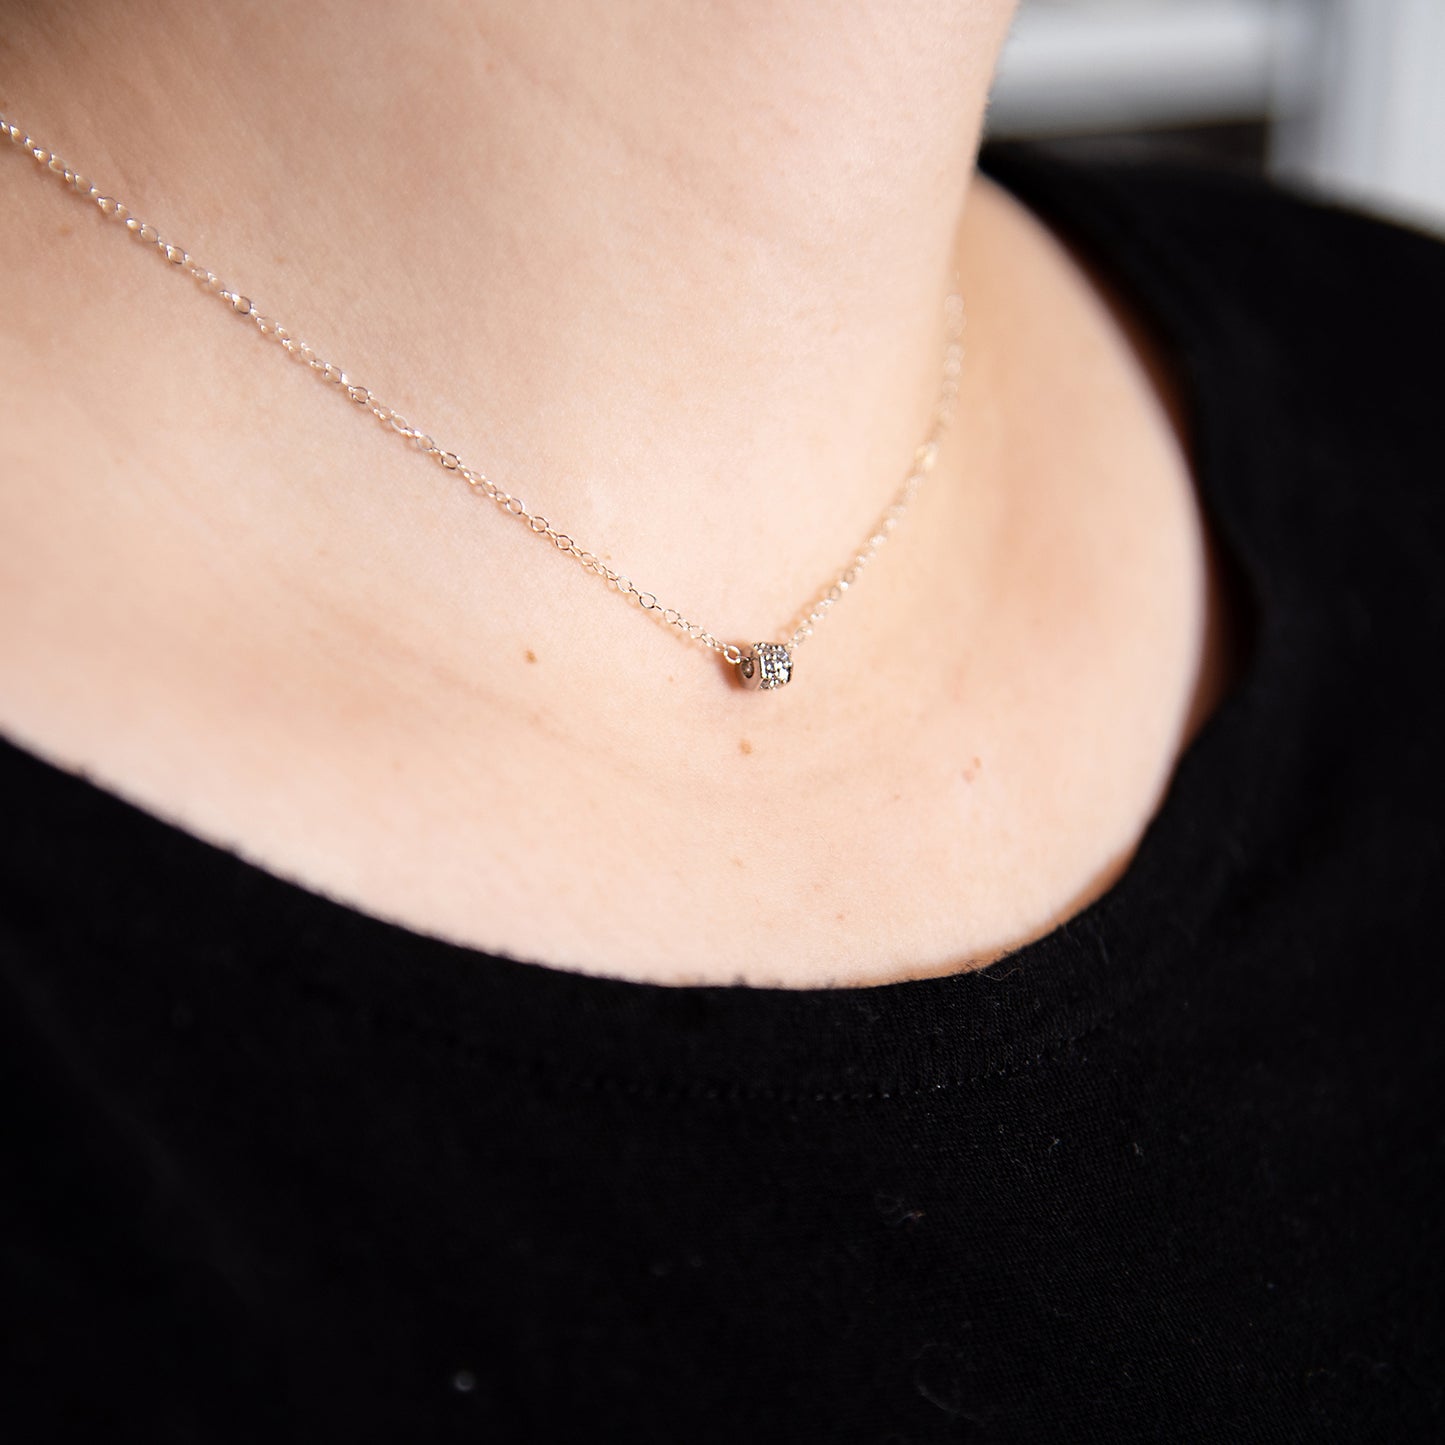 Dainty Jewelry Gifts for Women